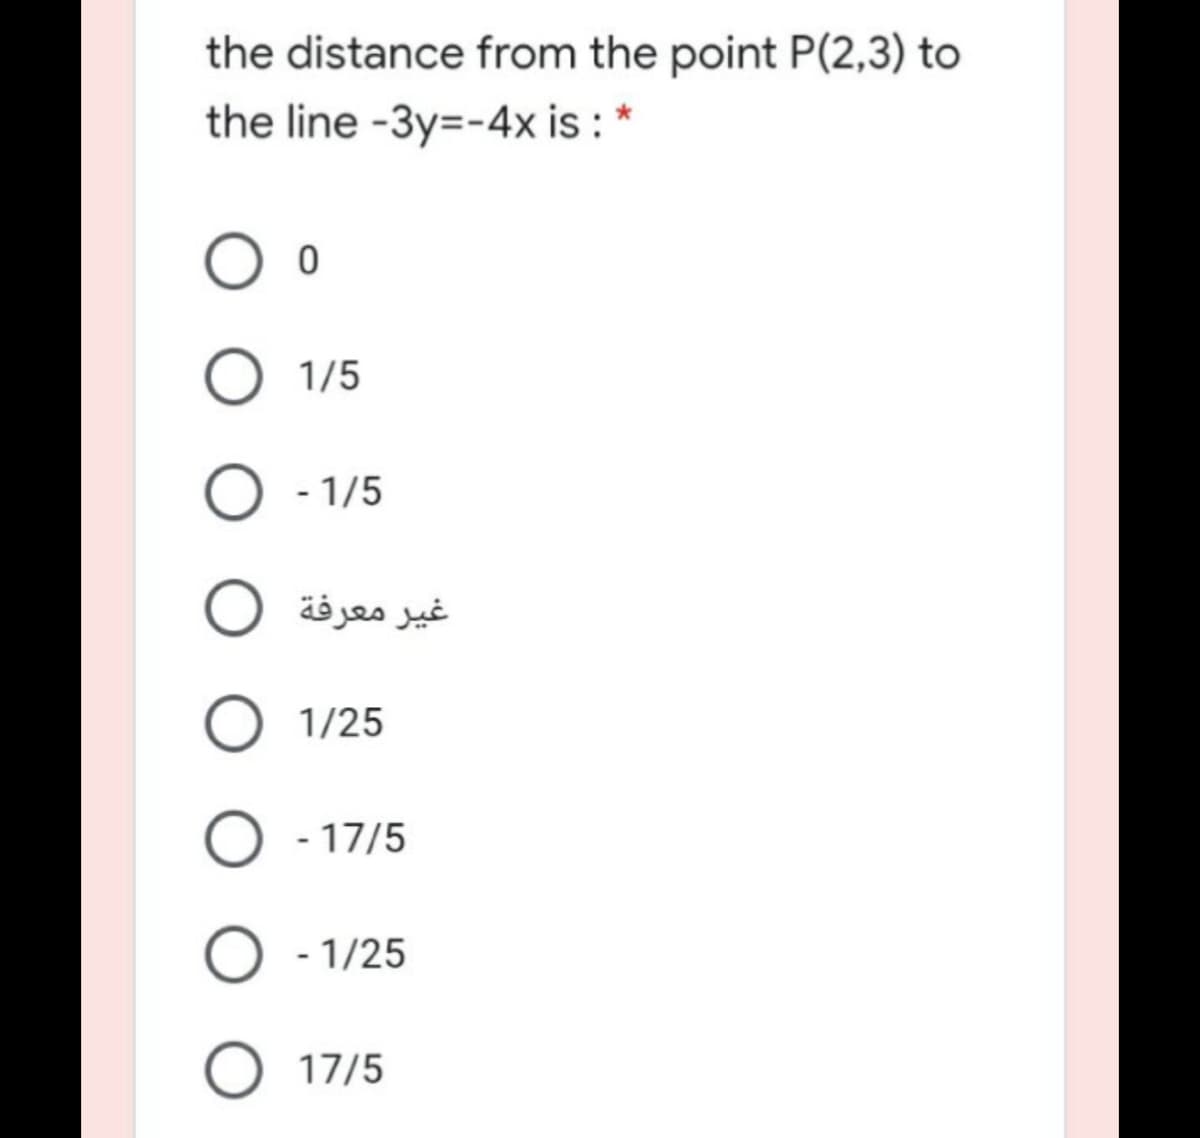 the distance from the point P(2,3) to
the line -3y=-4x is : *
1/5
- 1/5
غير معرفة
1/25
O - 17/5
- 1/25
O 17/5
